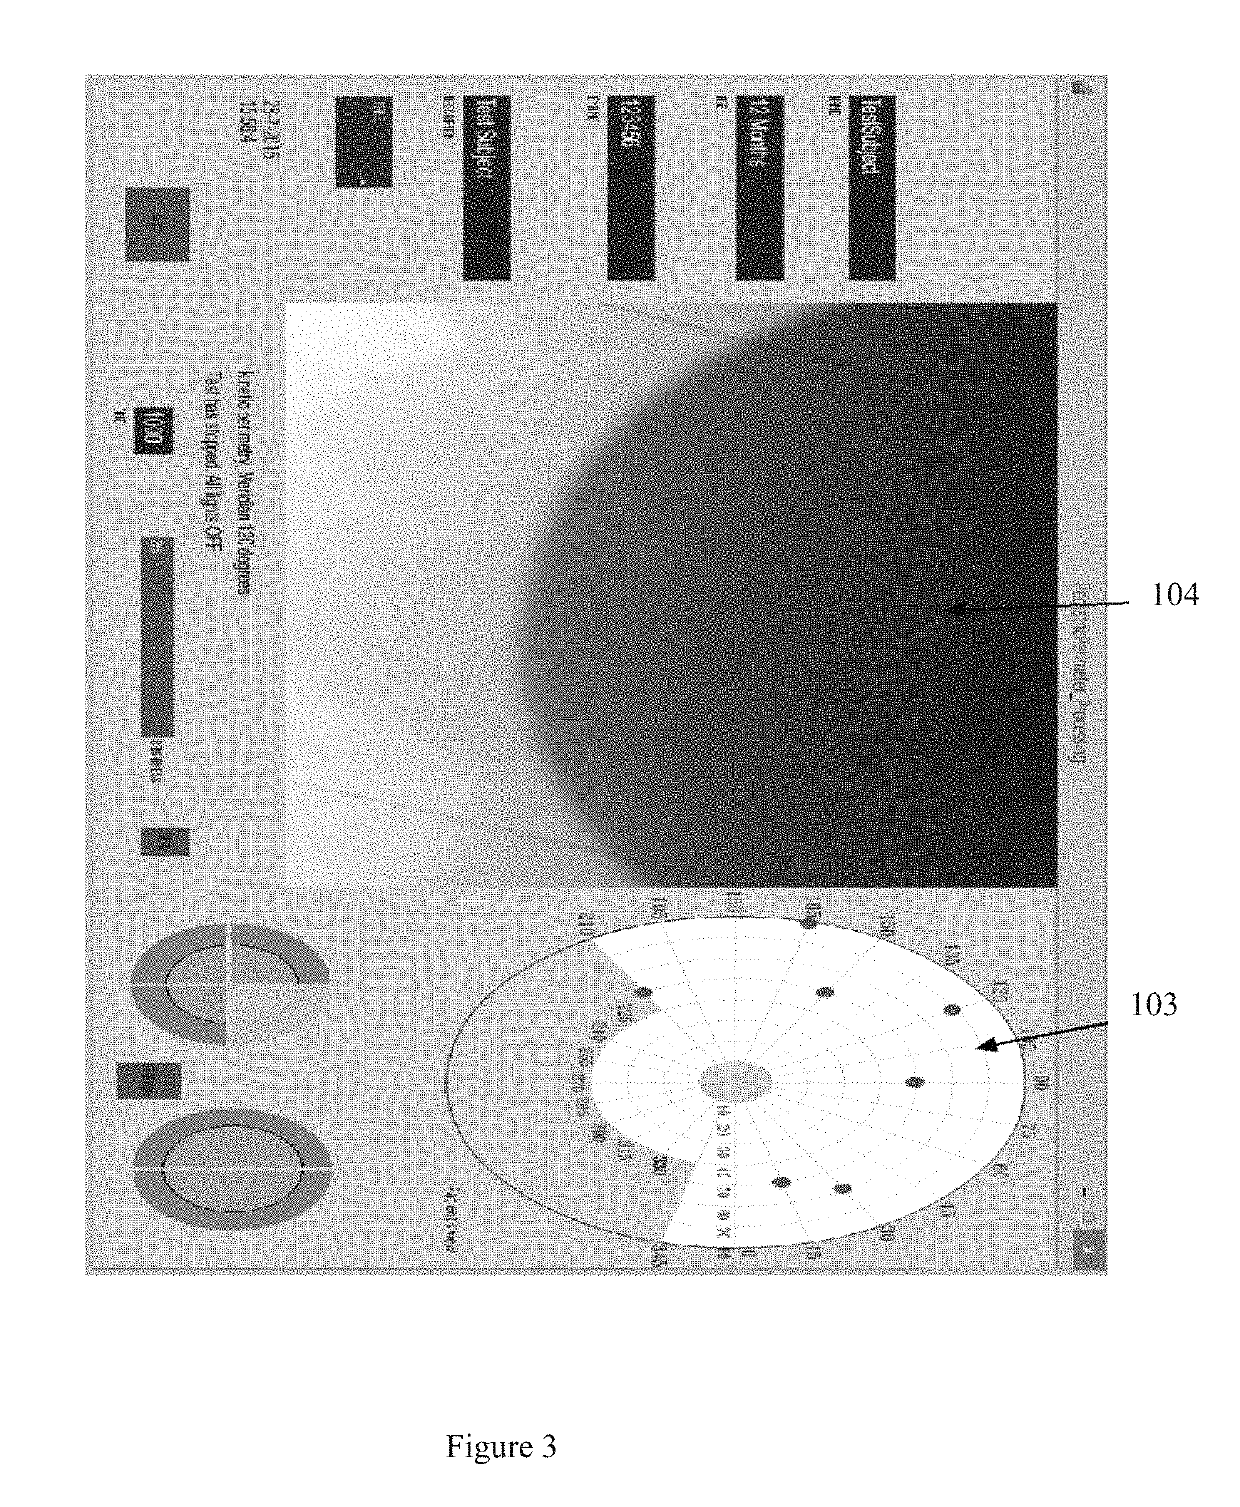 Apparatus and a method therewith to quantify visual patterns in infants